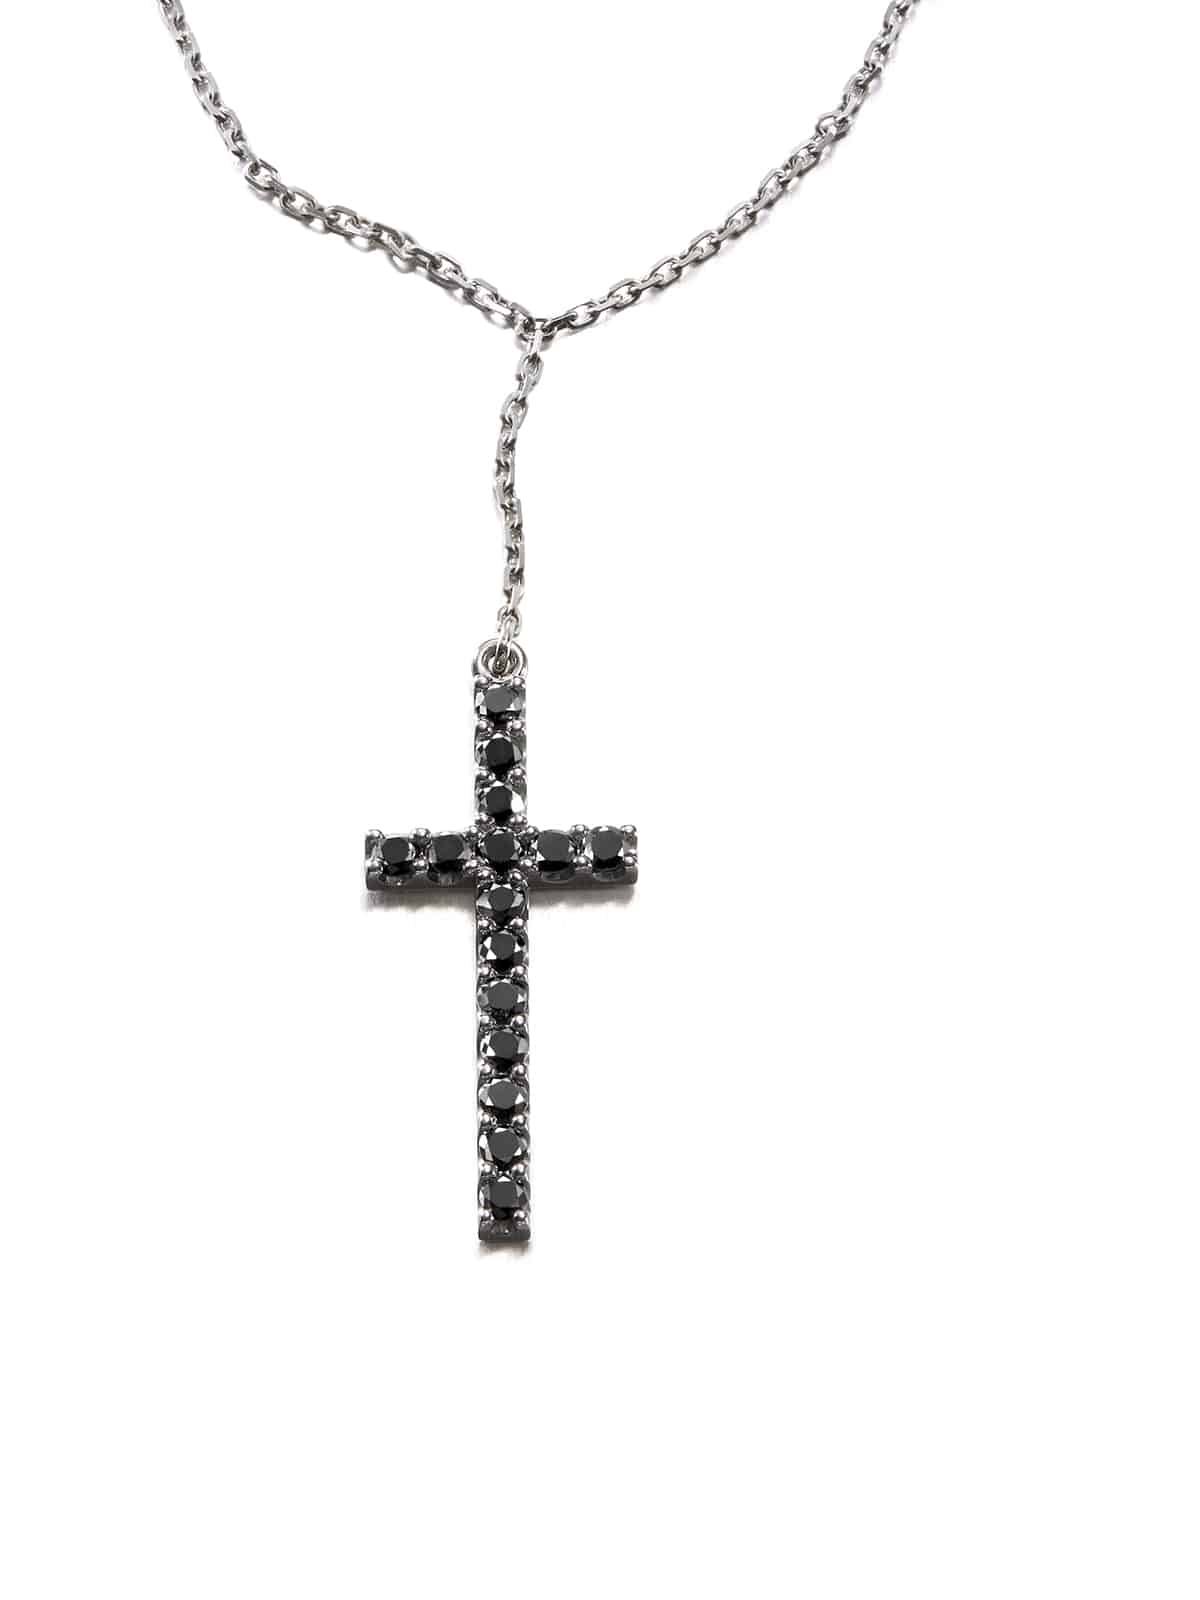 Crossed necklace